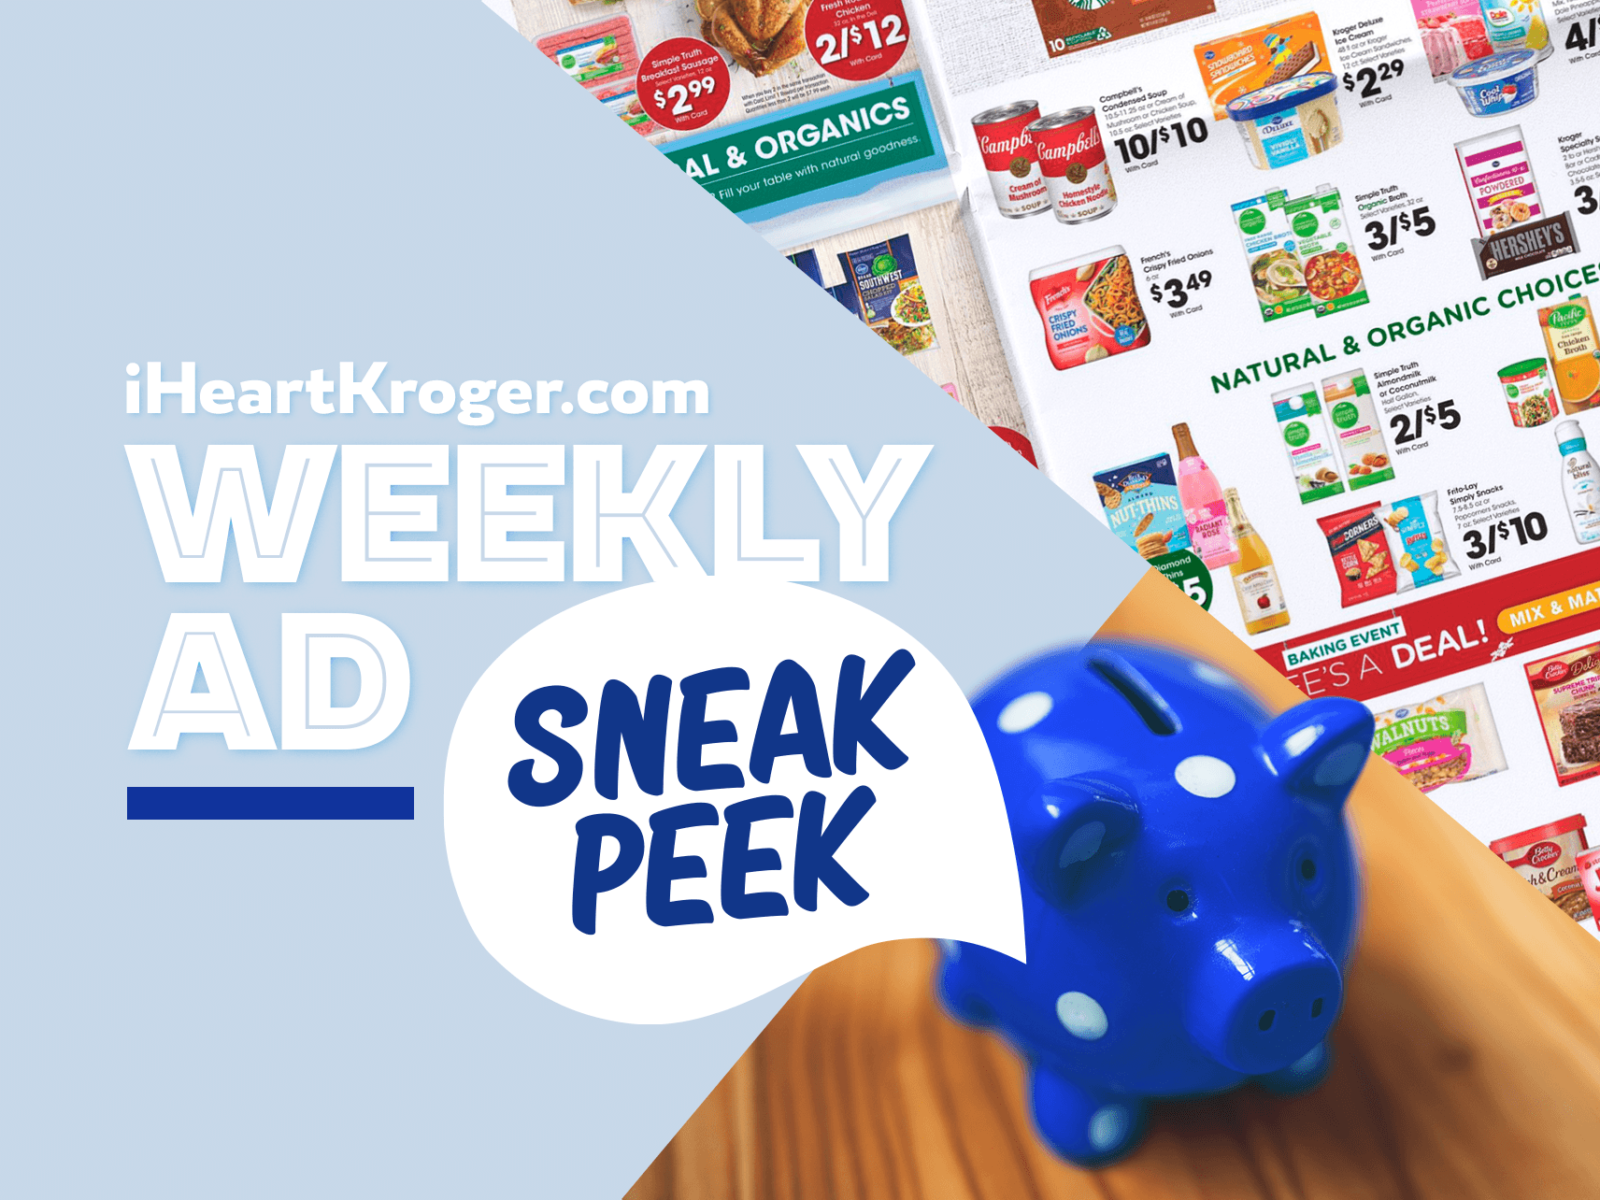 Kroger Ad & Coupons Week Of 5/3 to 5/9 – Mega Sale Continues